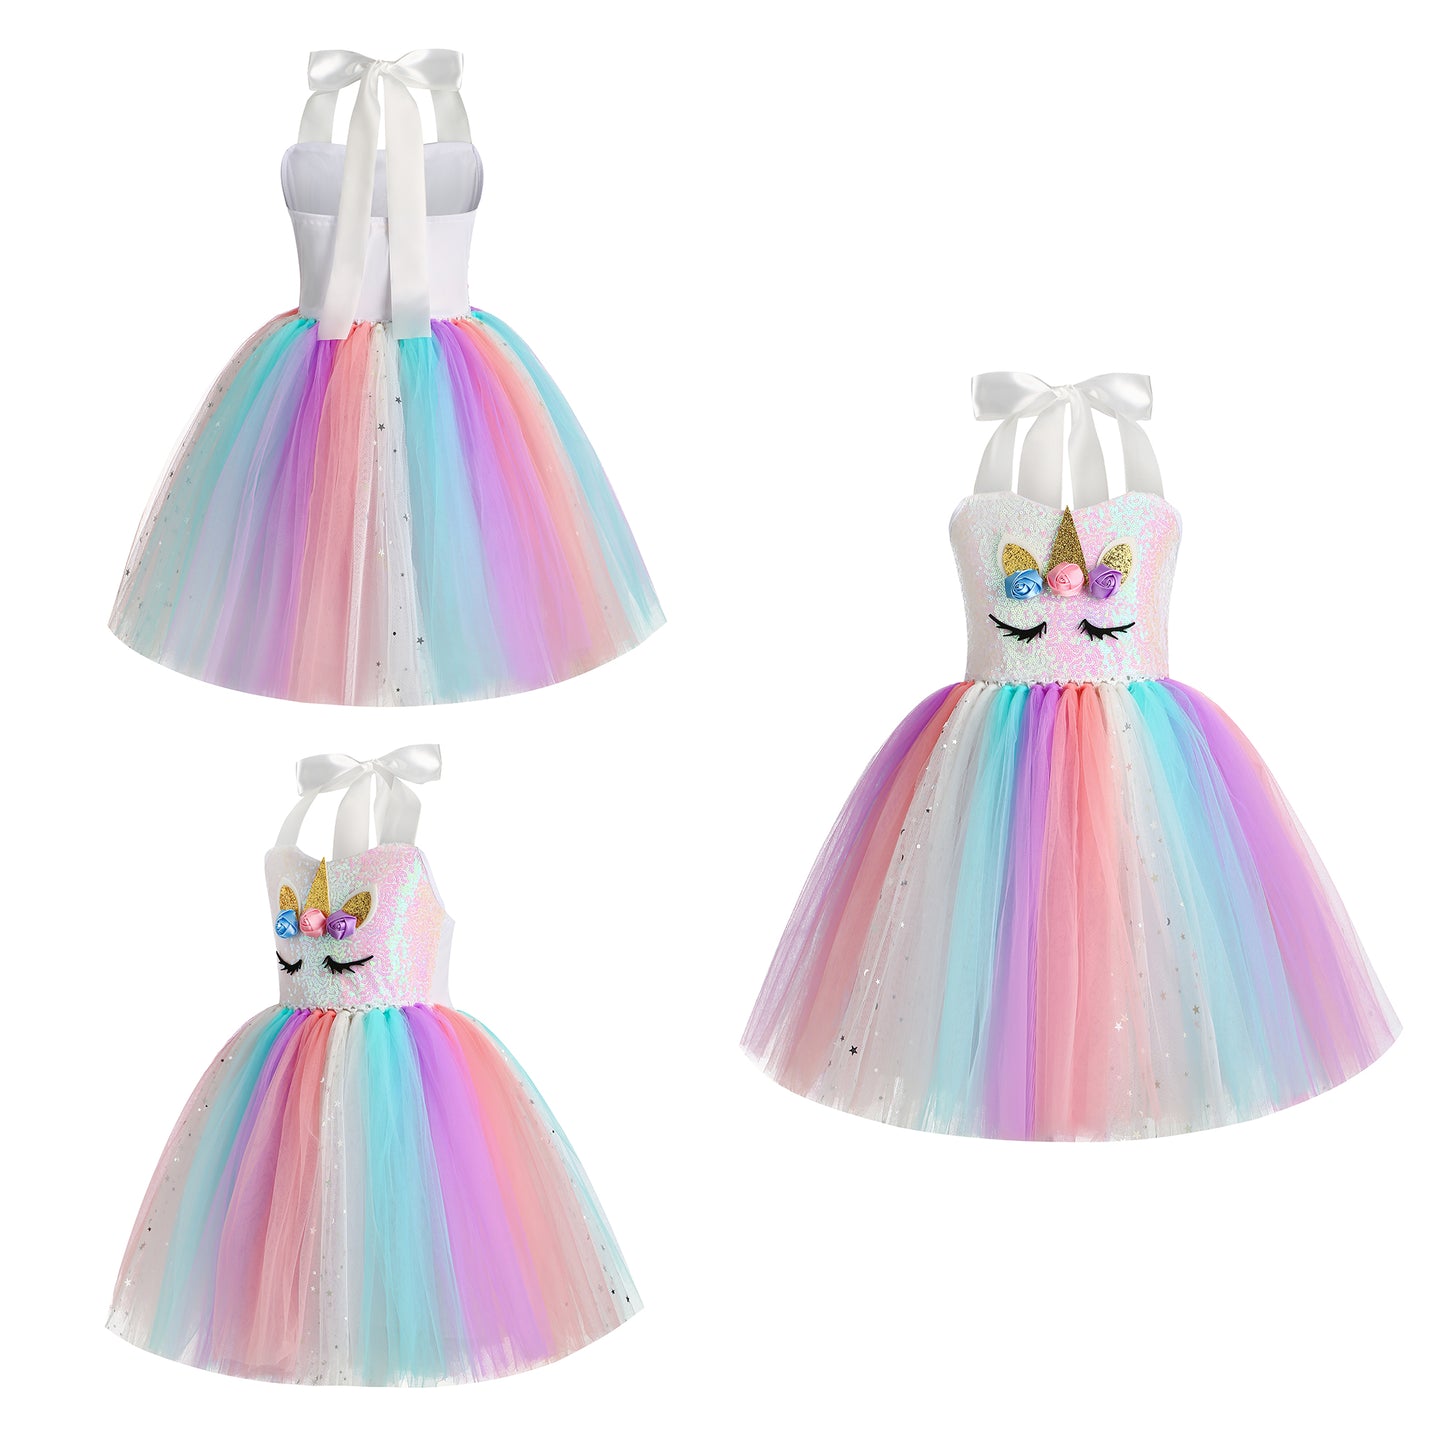 Foierp Tutu Dress Costume for Girls 2-8 Years Dress up for Halloween Christmas Birthday Wedding Party